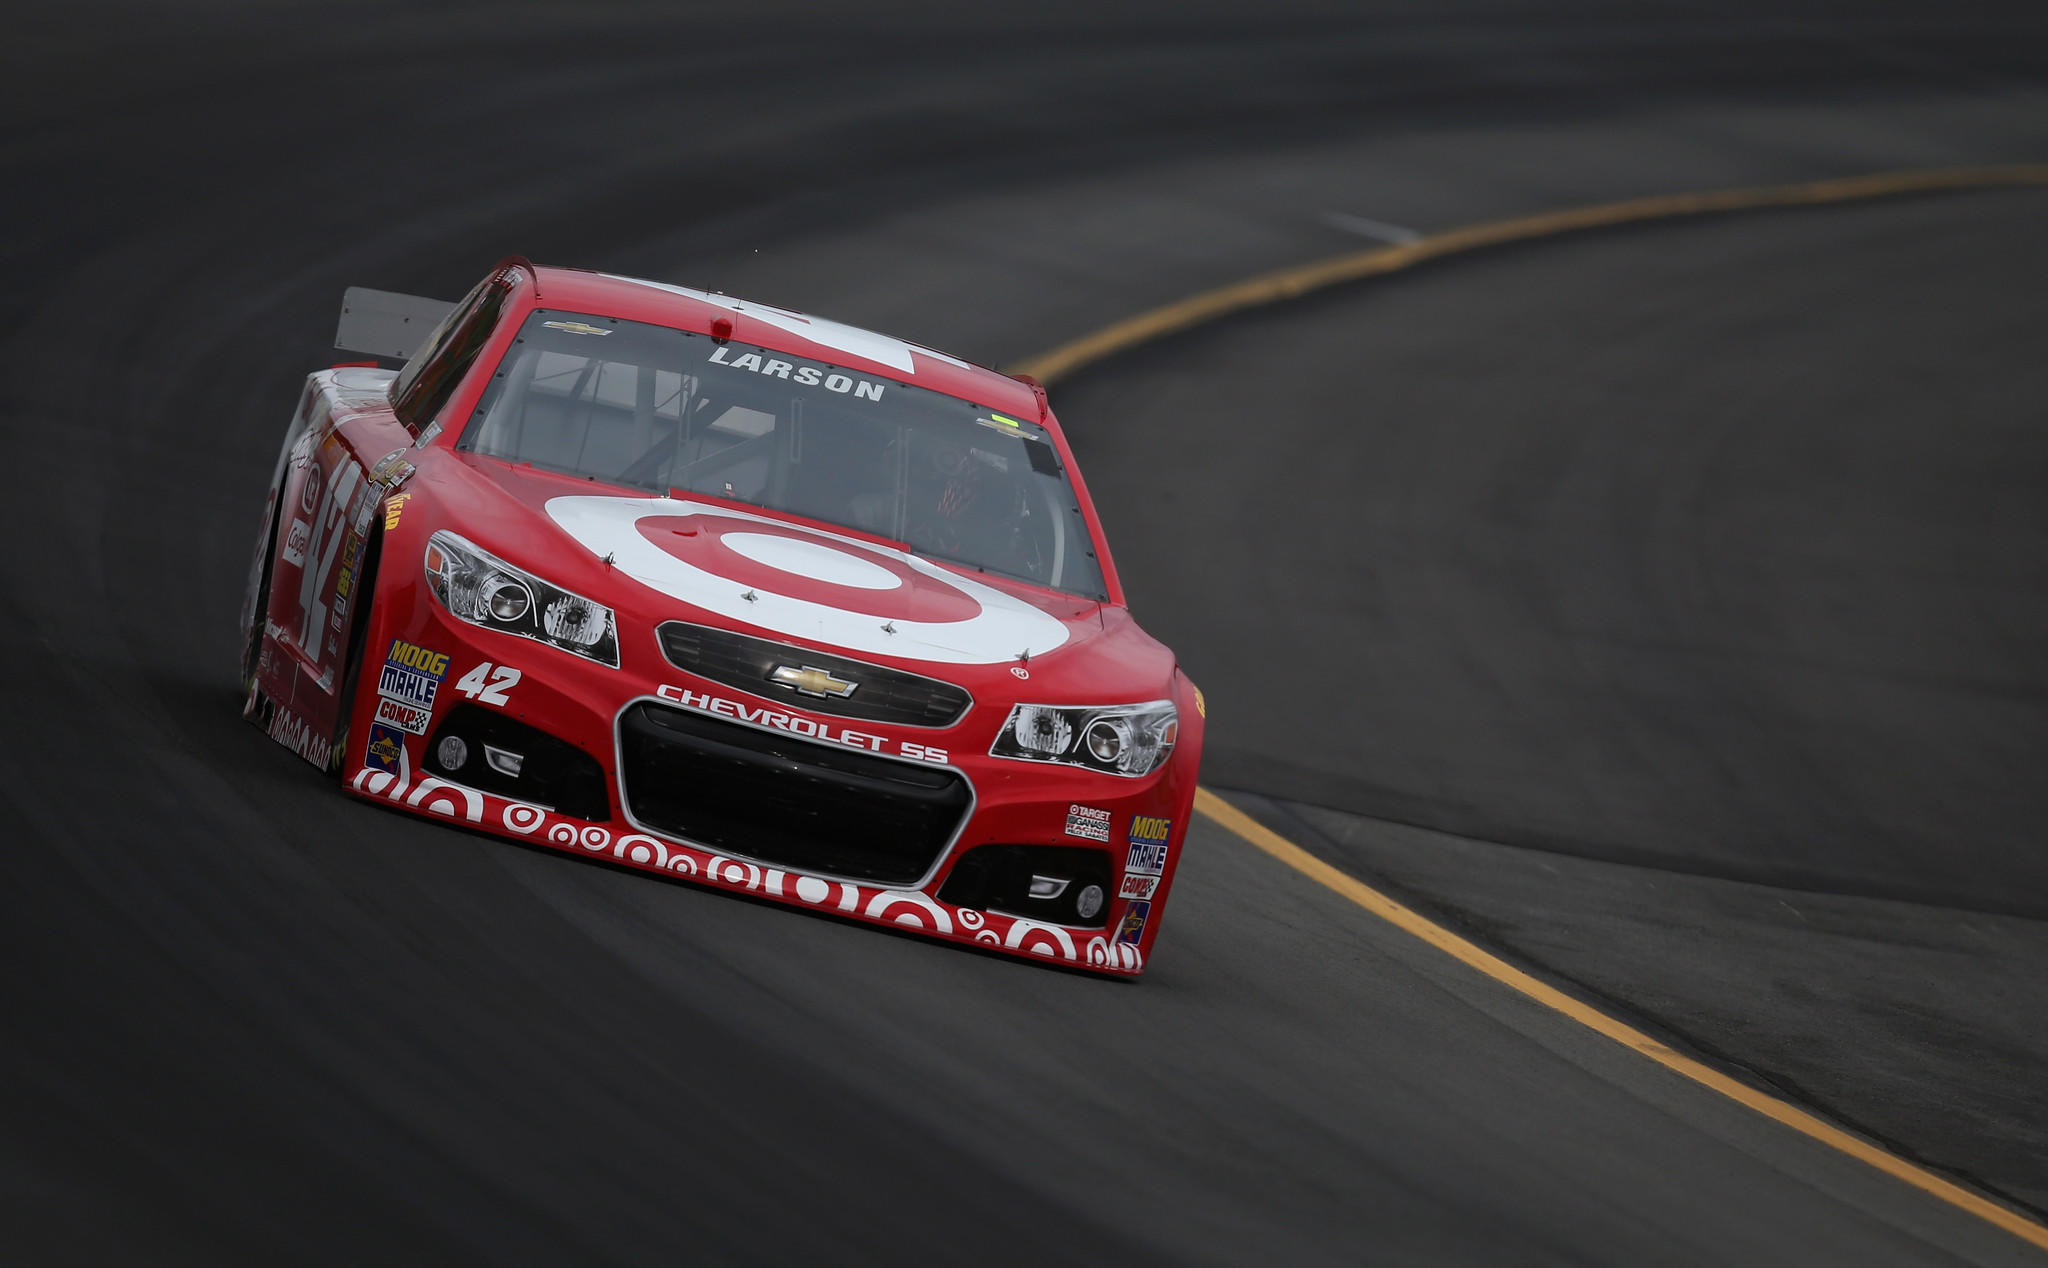 2048x1268 Kyle Larson sets mark for top speed in qualifying at Pocono Raceway.